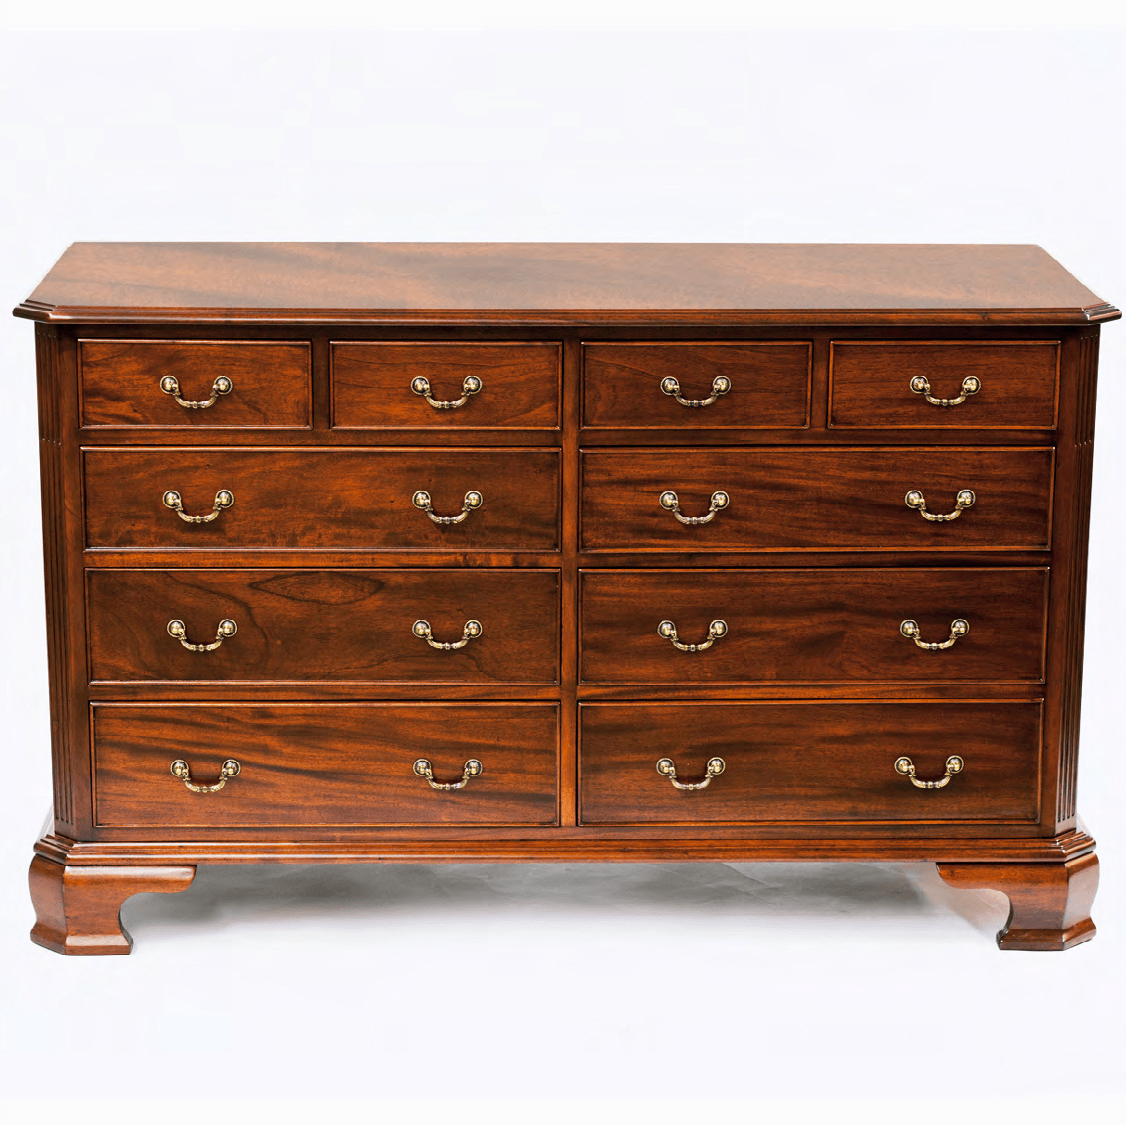 GEORGIAN STYLE DRESSER - House of Chippendale